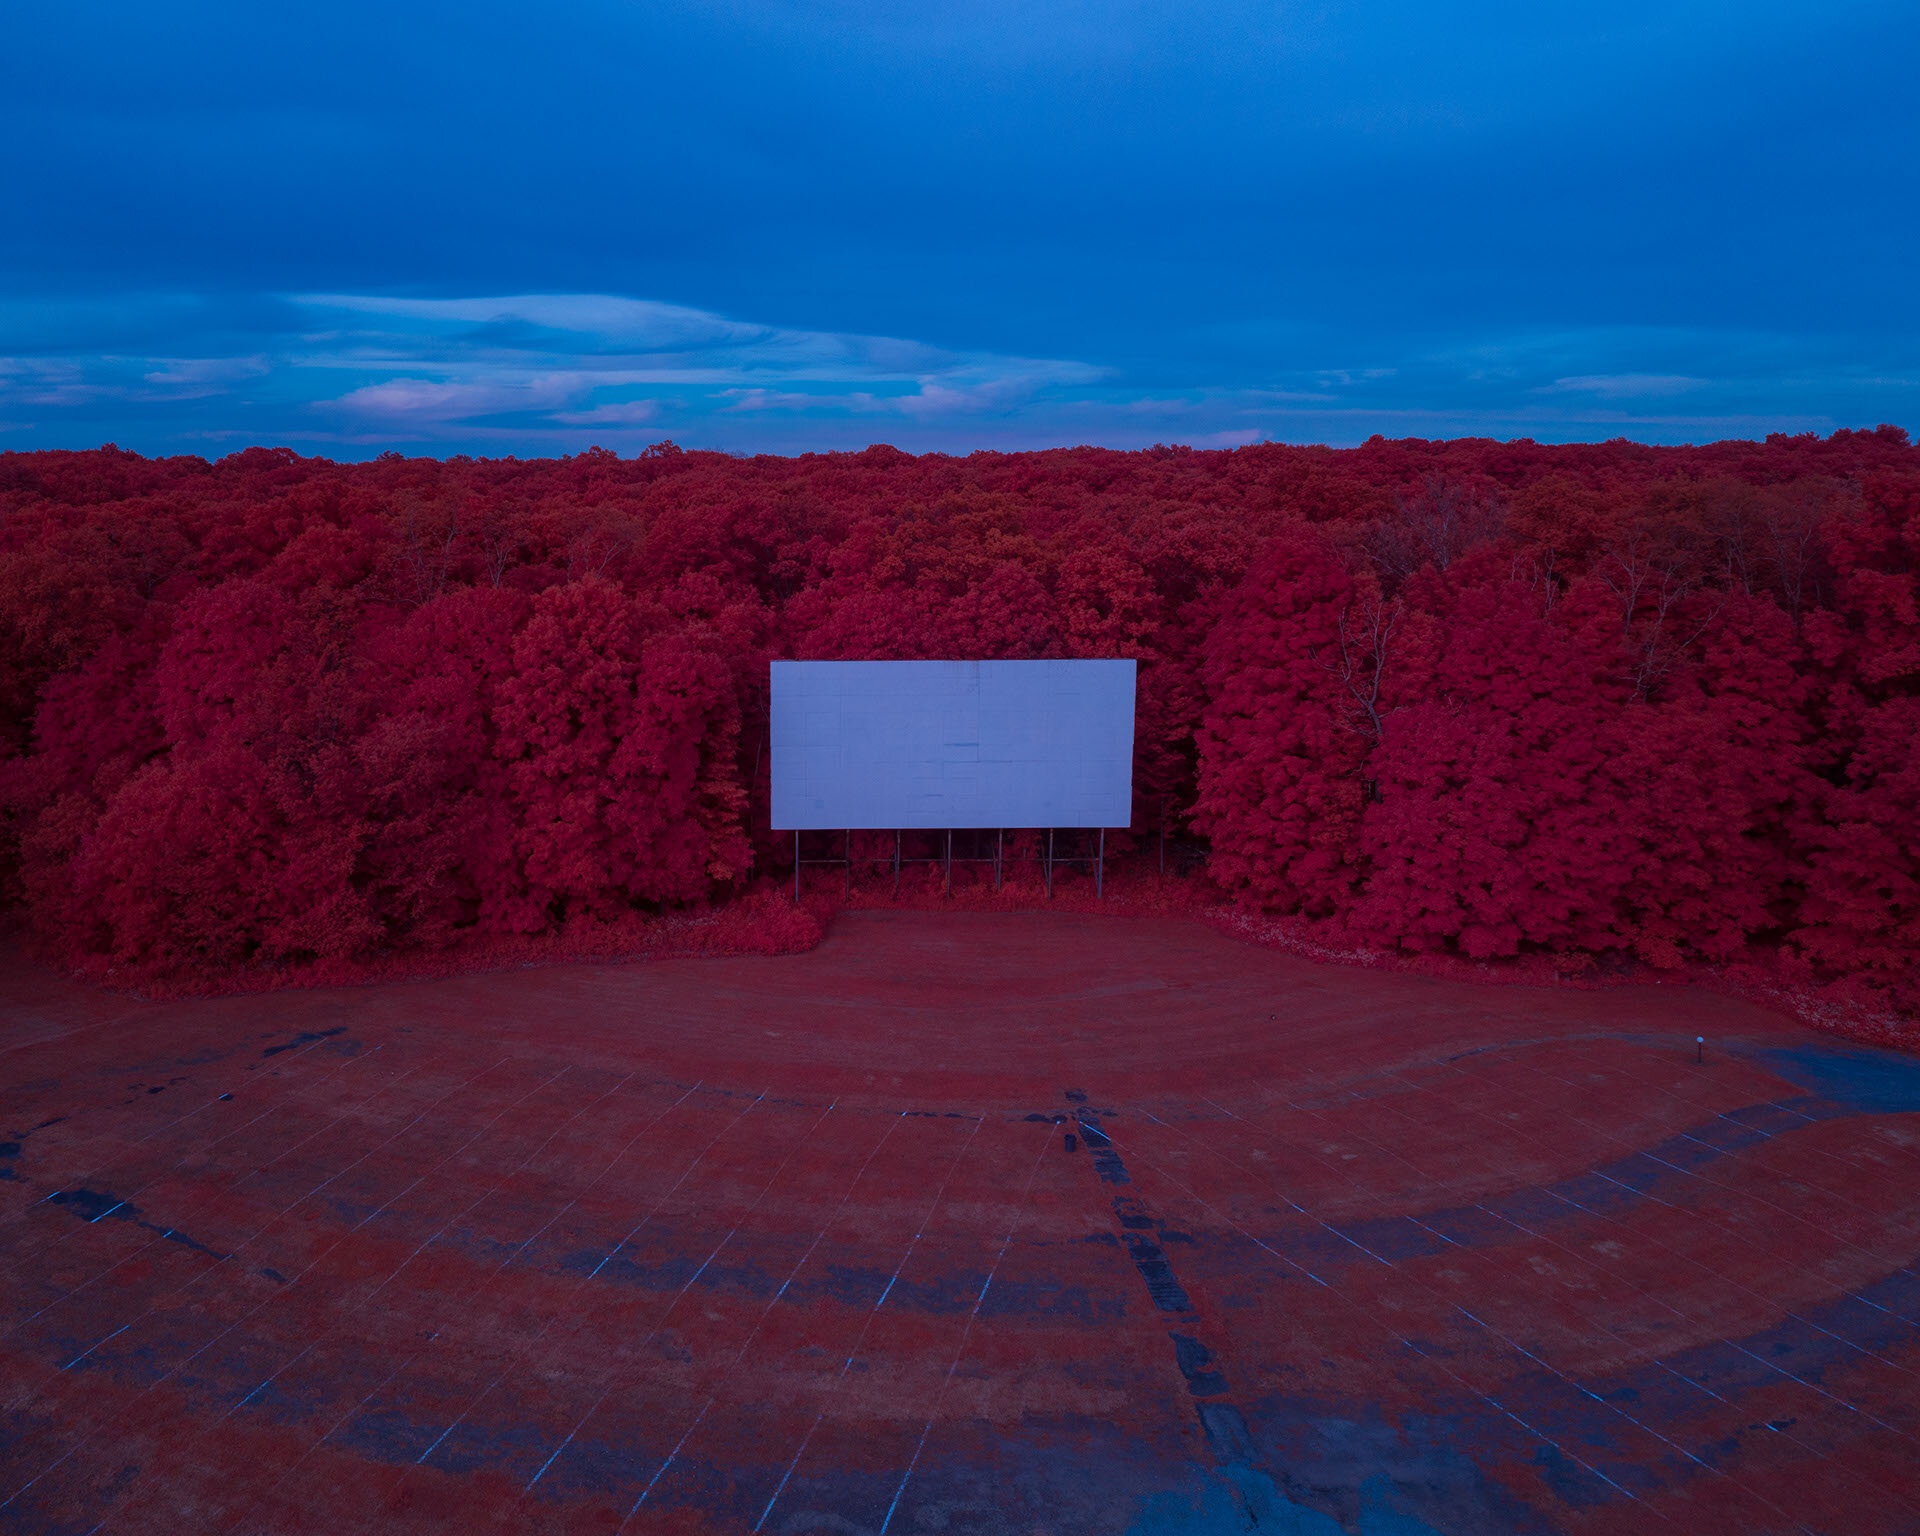 Drive in Theater, #1, New York, 2020.